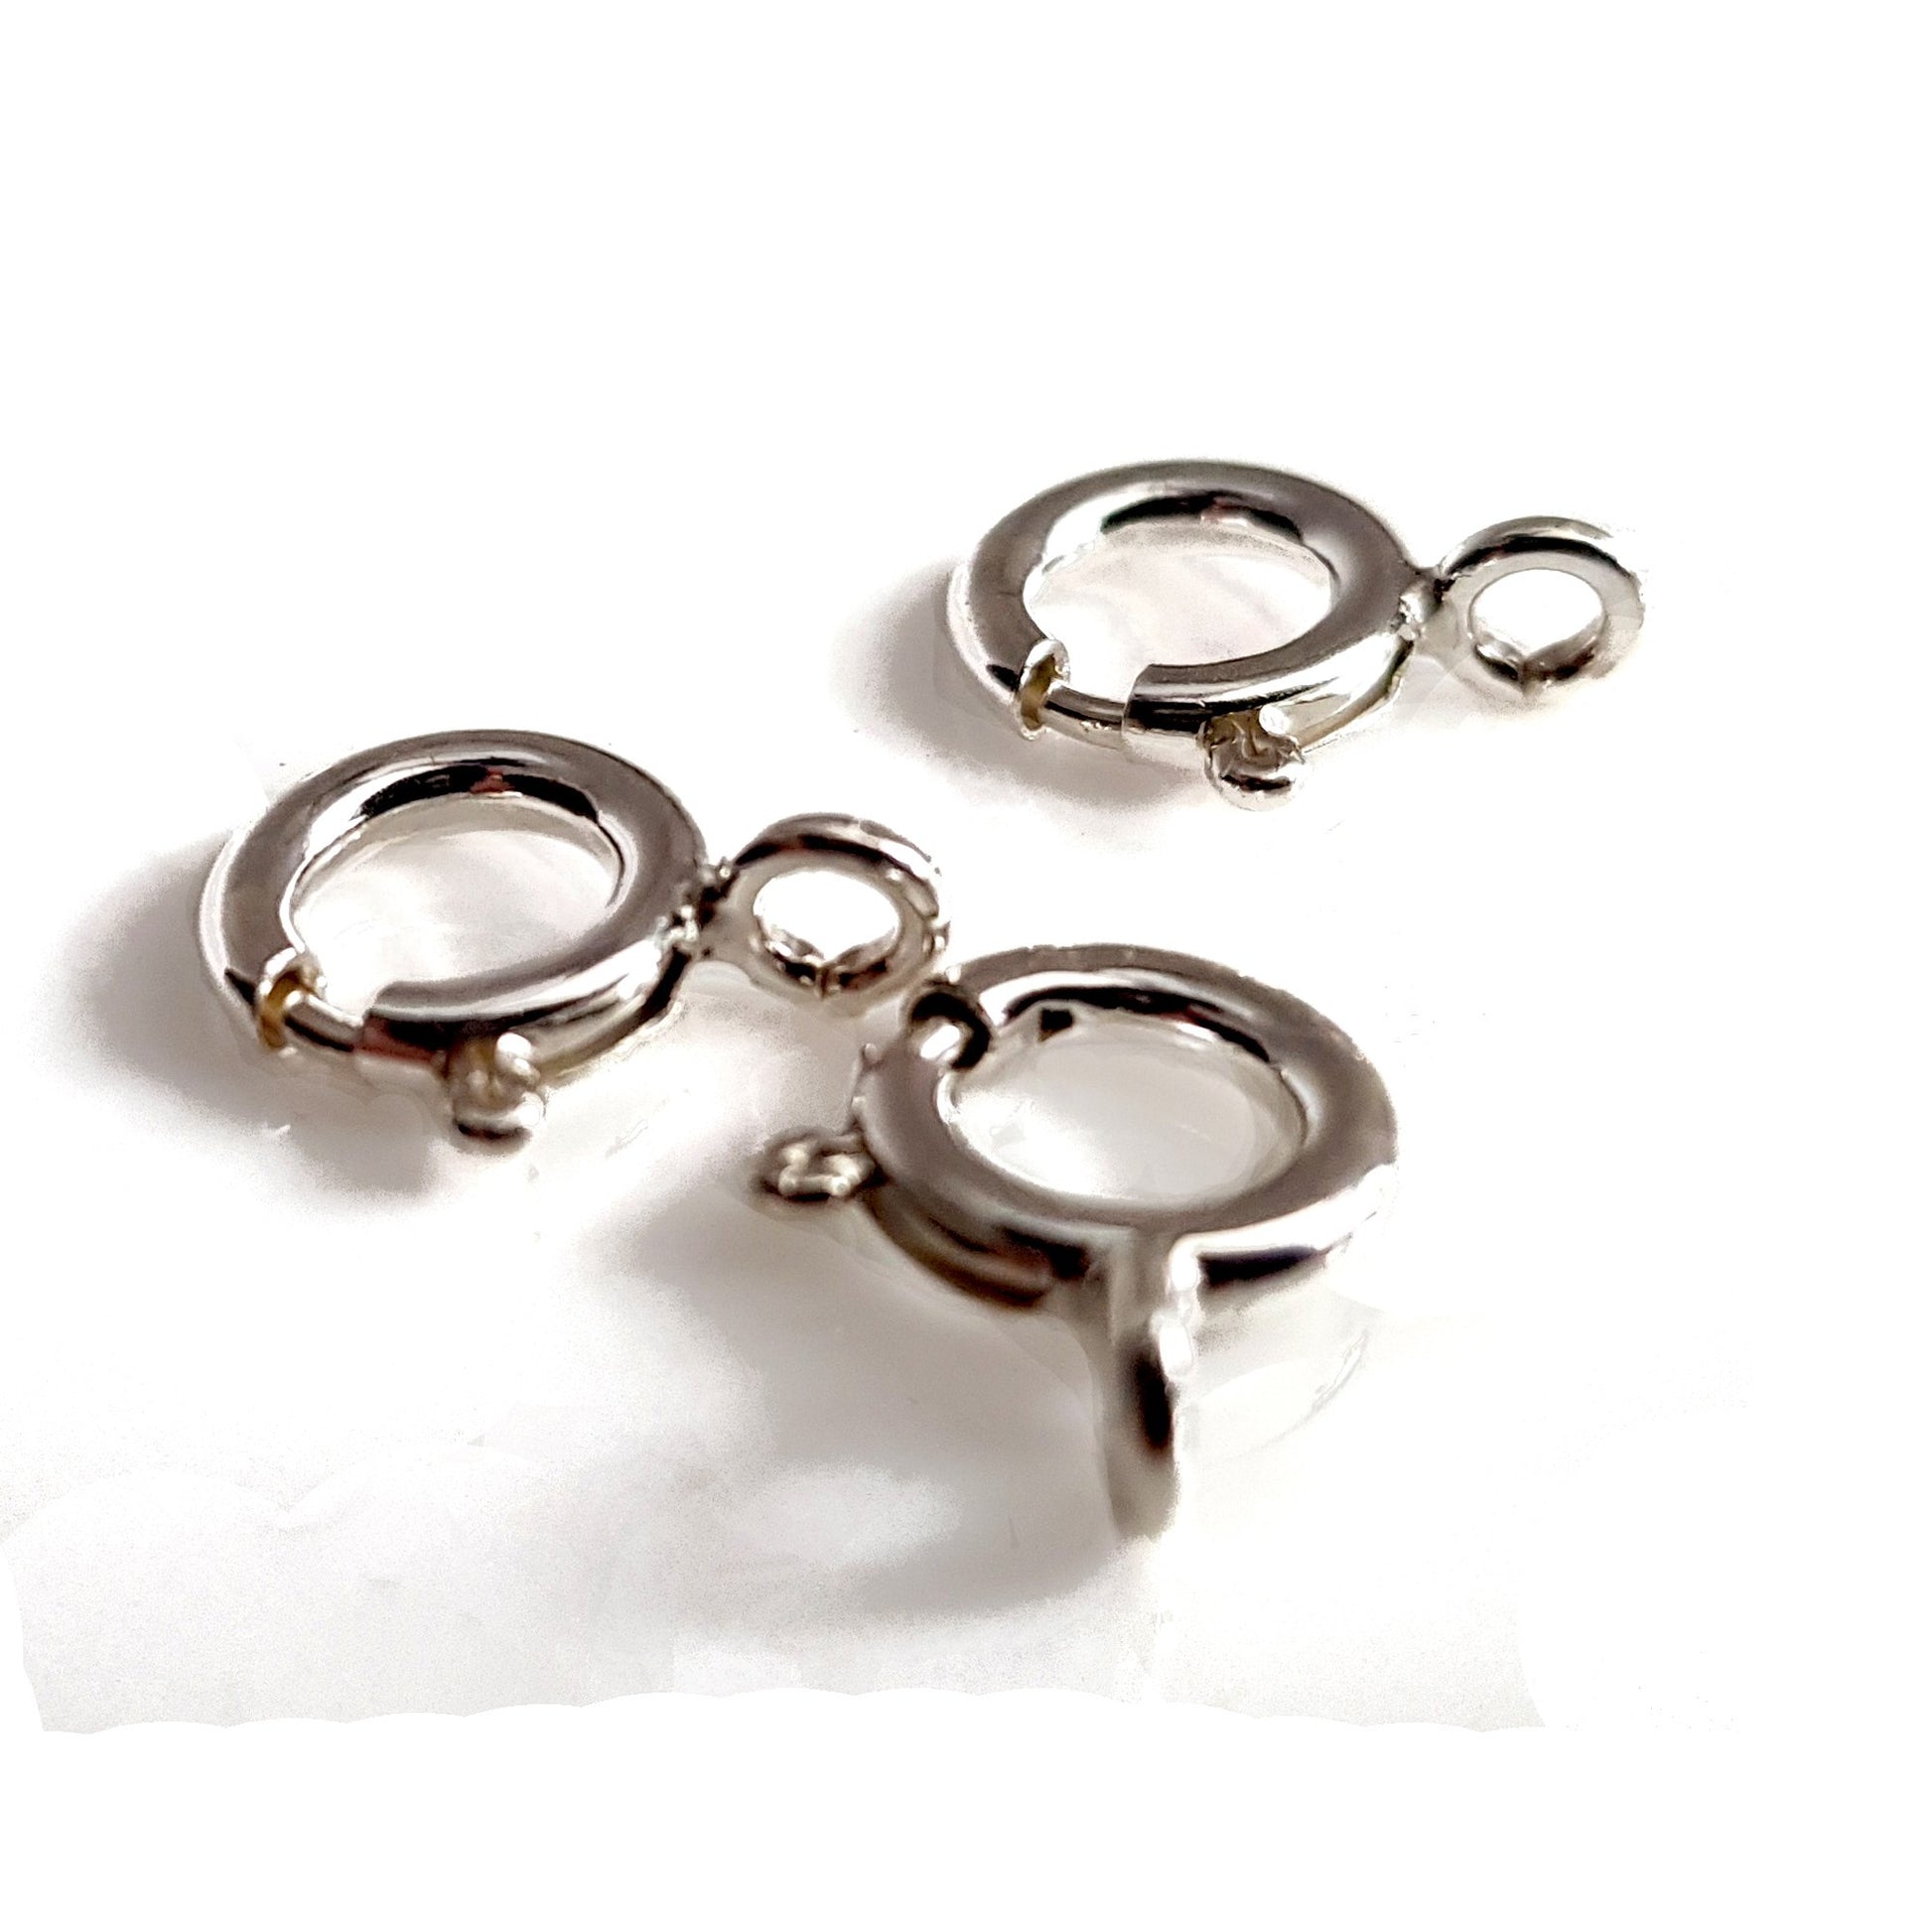 Bolt Ring Clasp 7mm Sterling Silver 3pcs | SS-022BR7 | Jewellery Supply - Kalitheo Jewellery